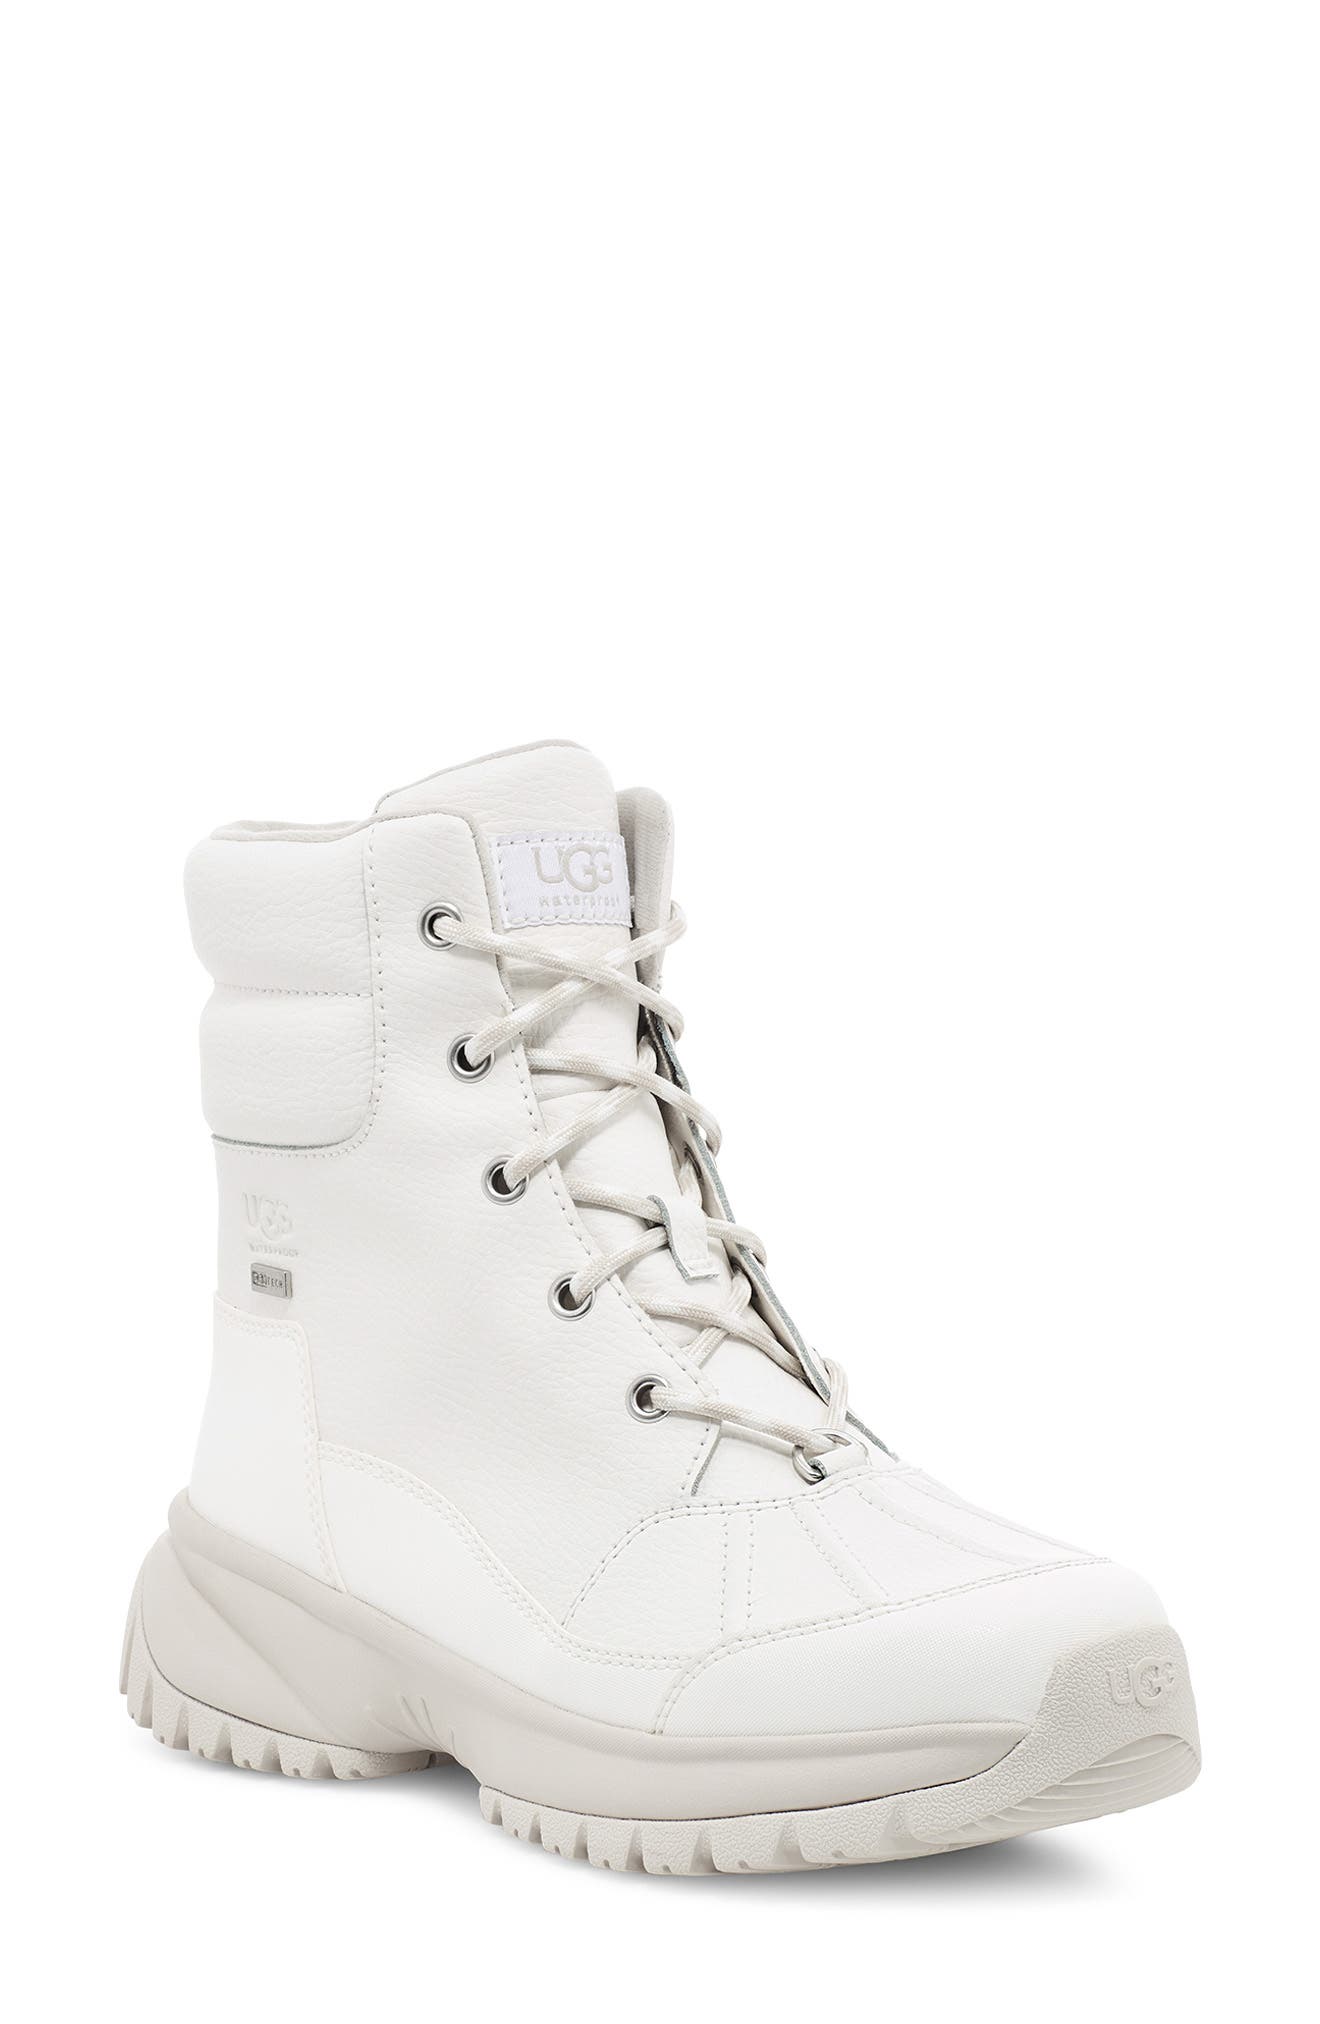 ugg waterproof lace up boots